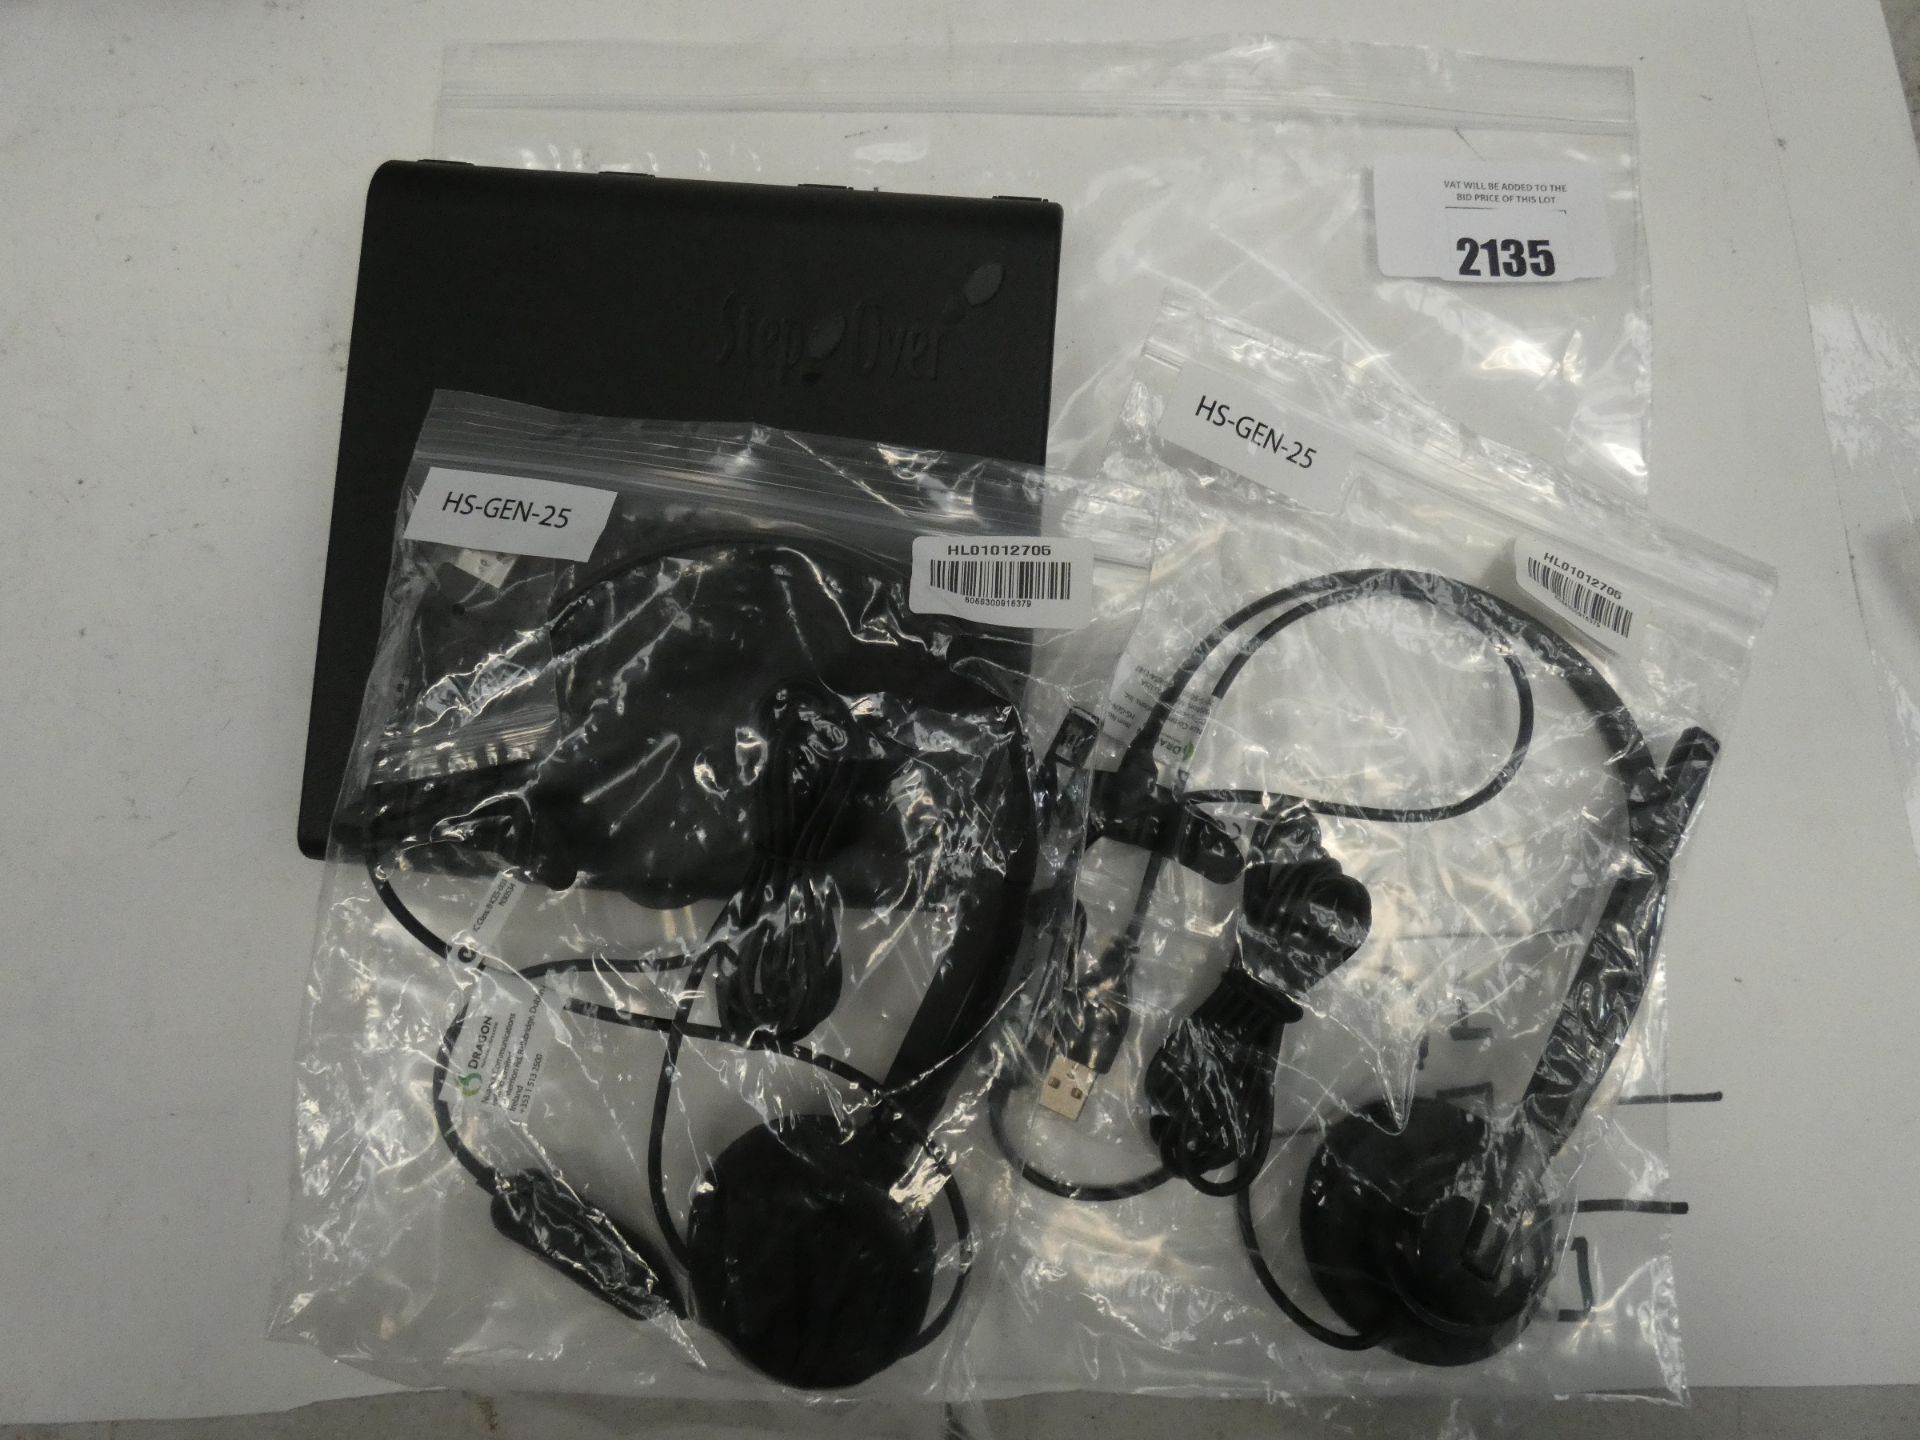 Two Dragon usb Operators headsets with a Step over signature pad.